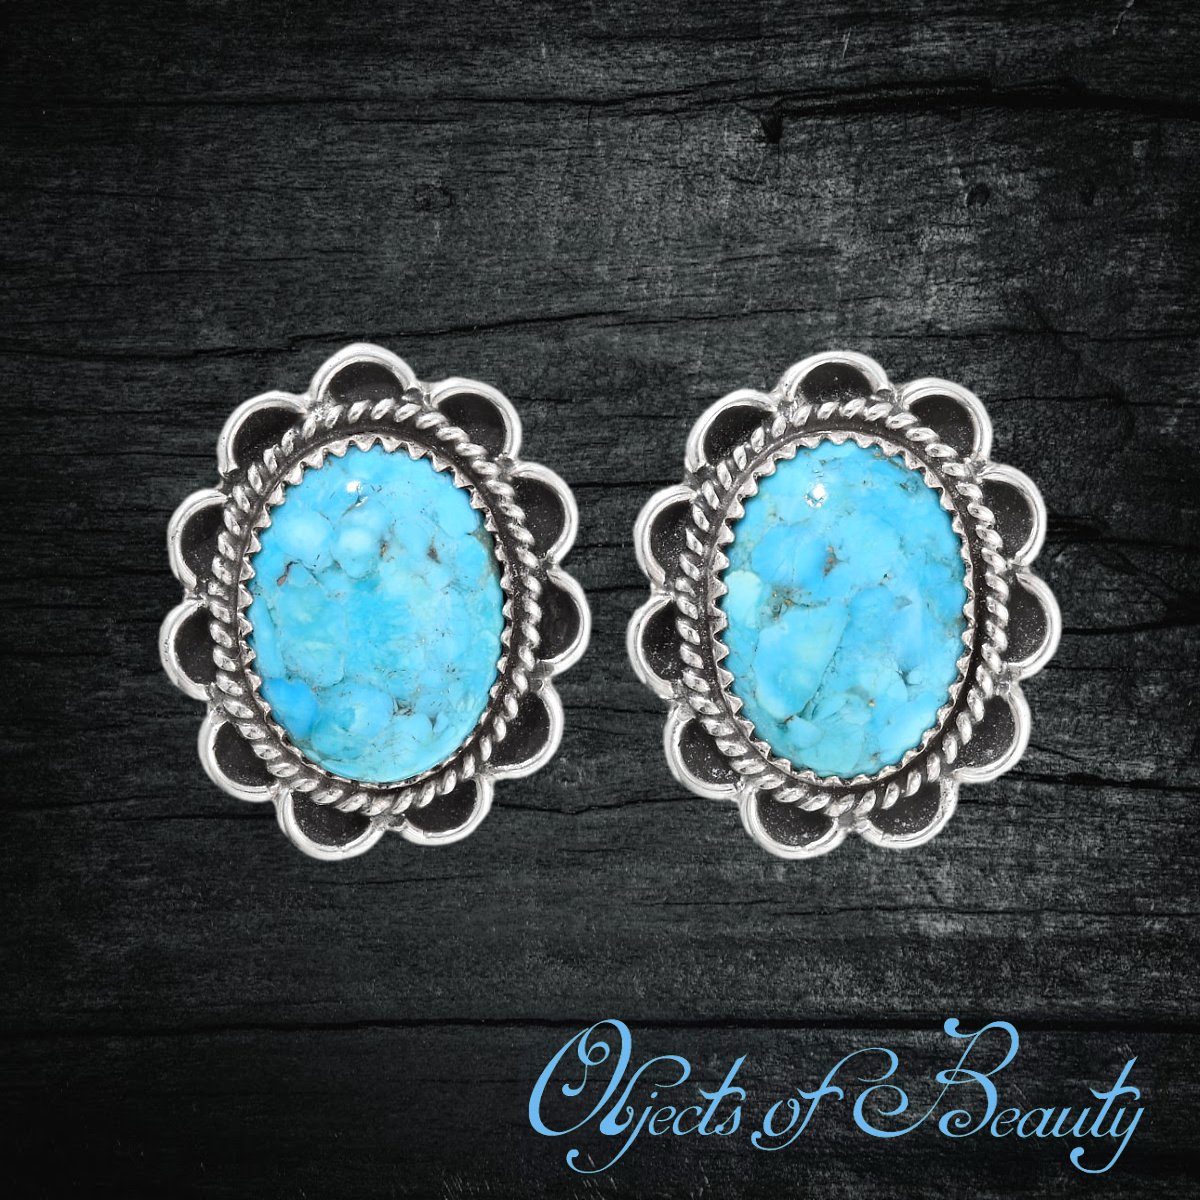 Blue Turquoise Silver Stud Post Earrings | Navajo Made Turquoise Earrings Objects of Beauty Southwest 